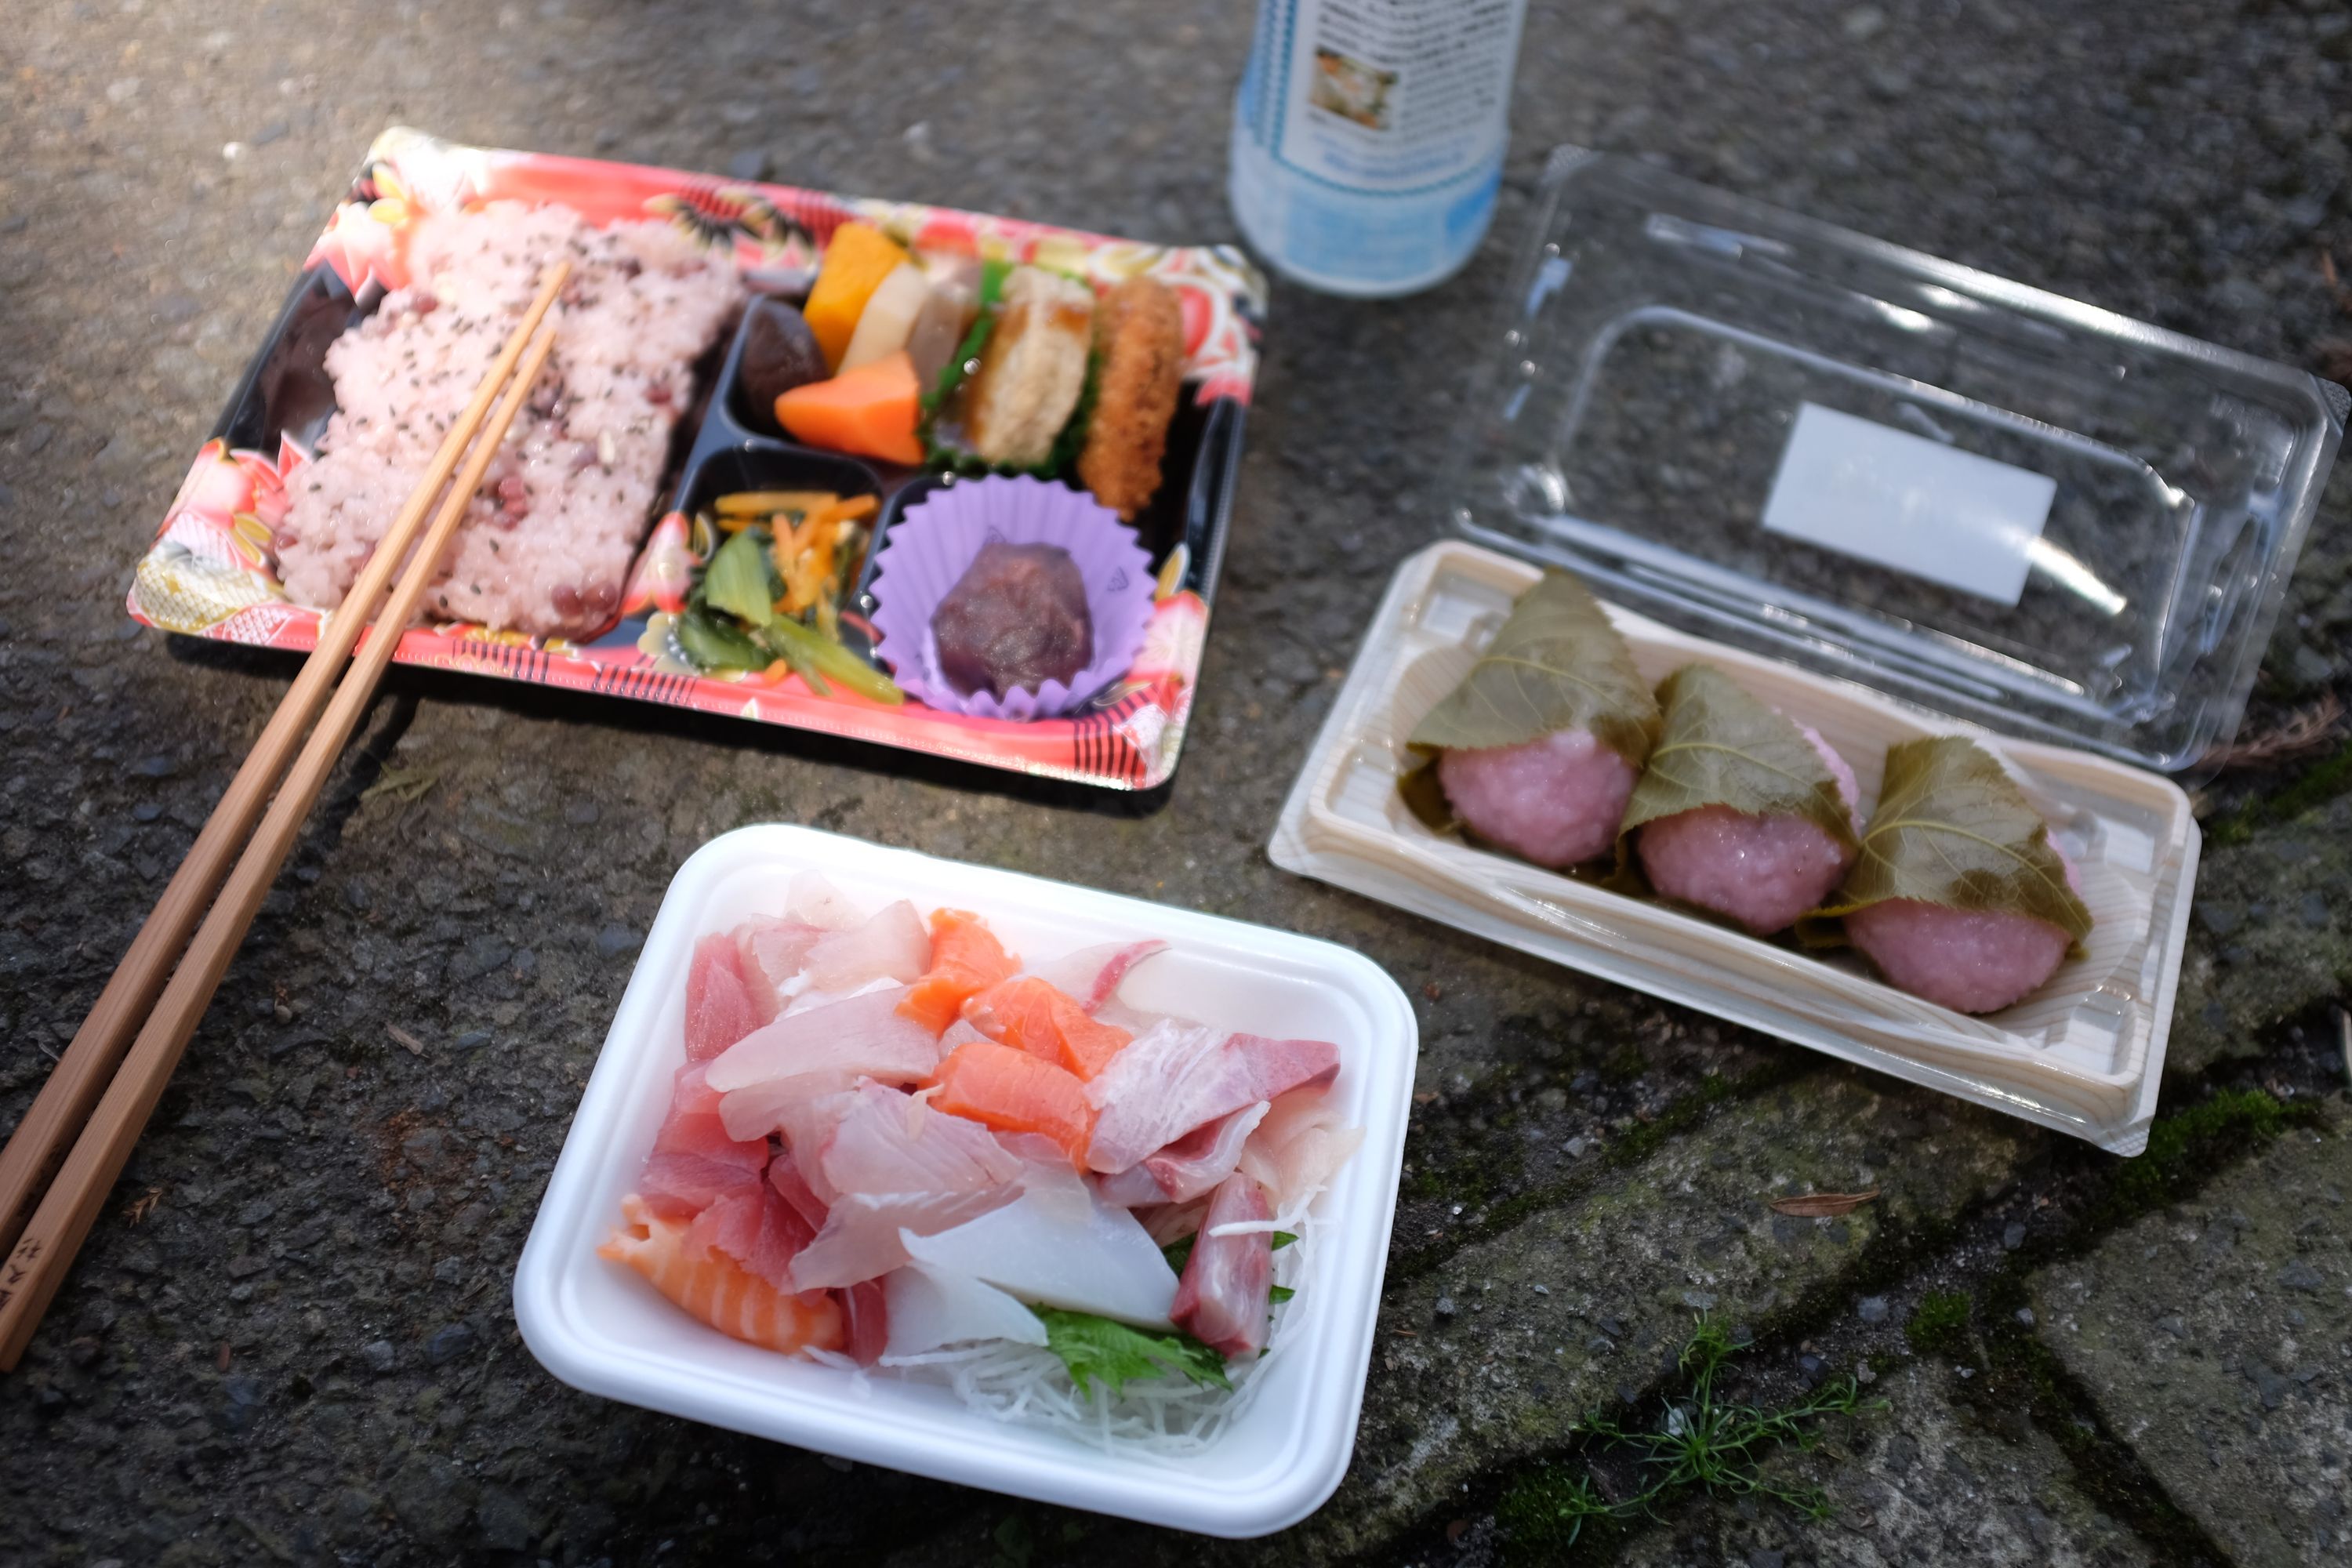 A lunch of sashimi, pink rice balls, and assorted snacks laid on the asphalt in plastic trays.